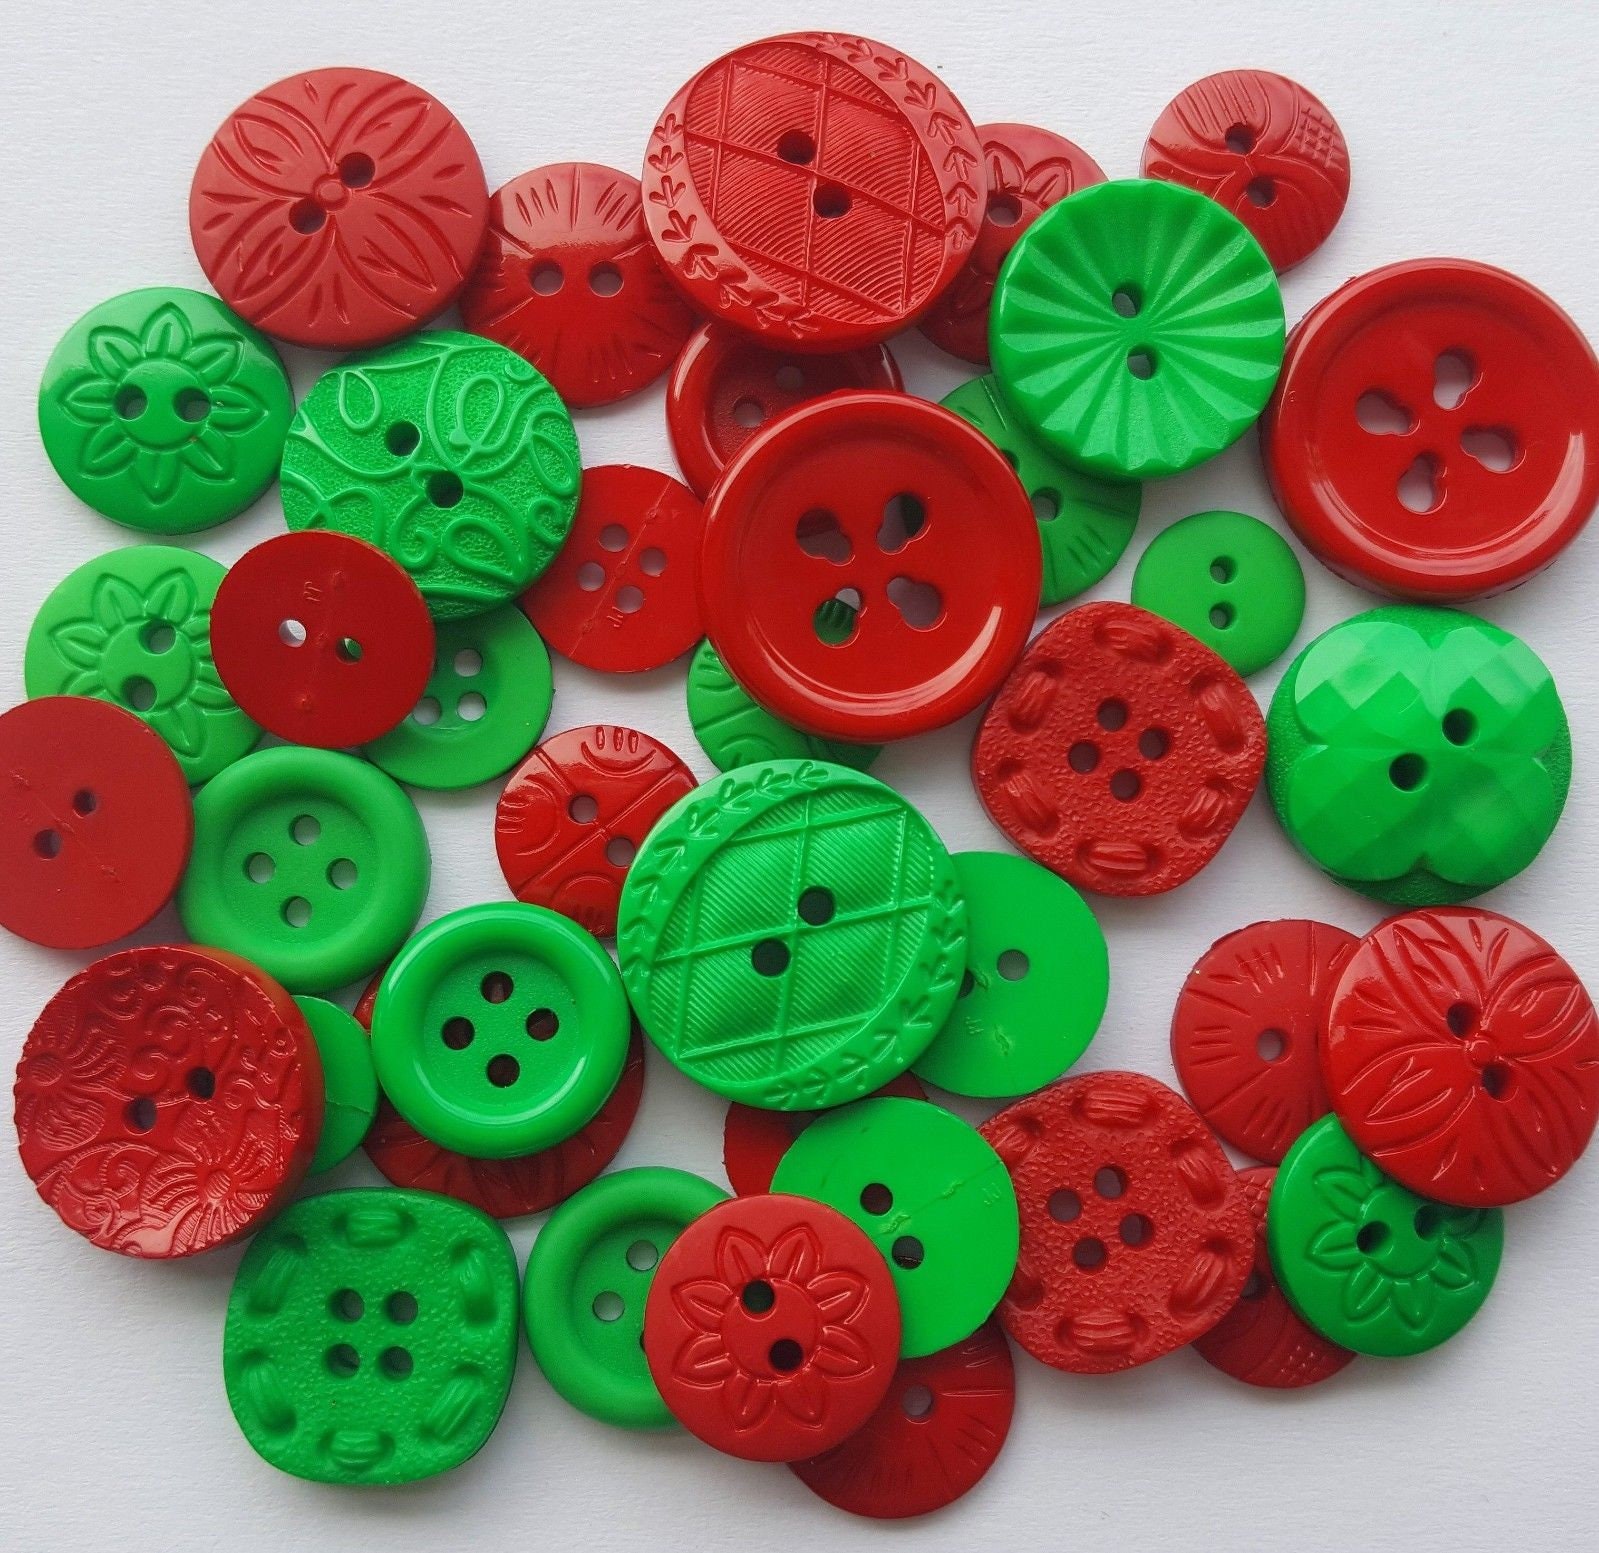 Tatuo 1000 Pieces Red Buttons Round Craft Resin Buttons for